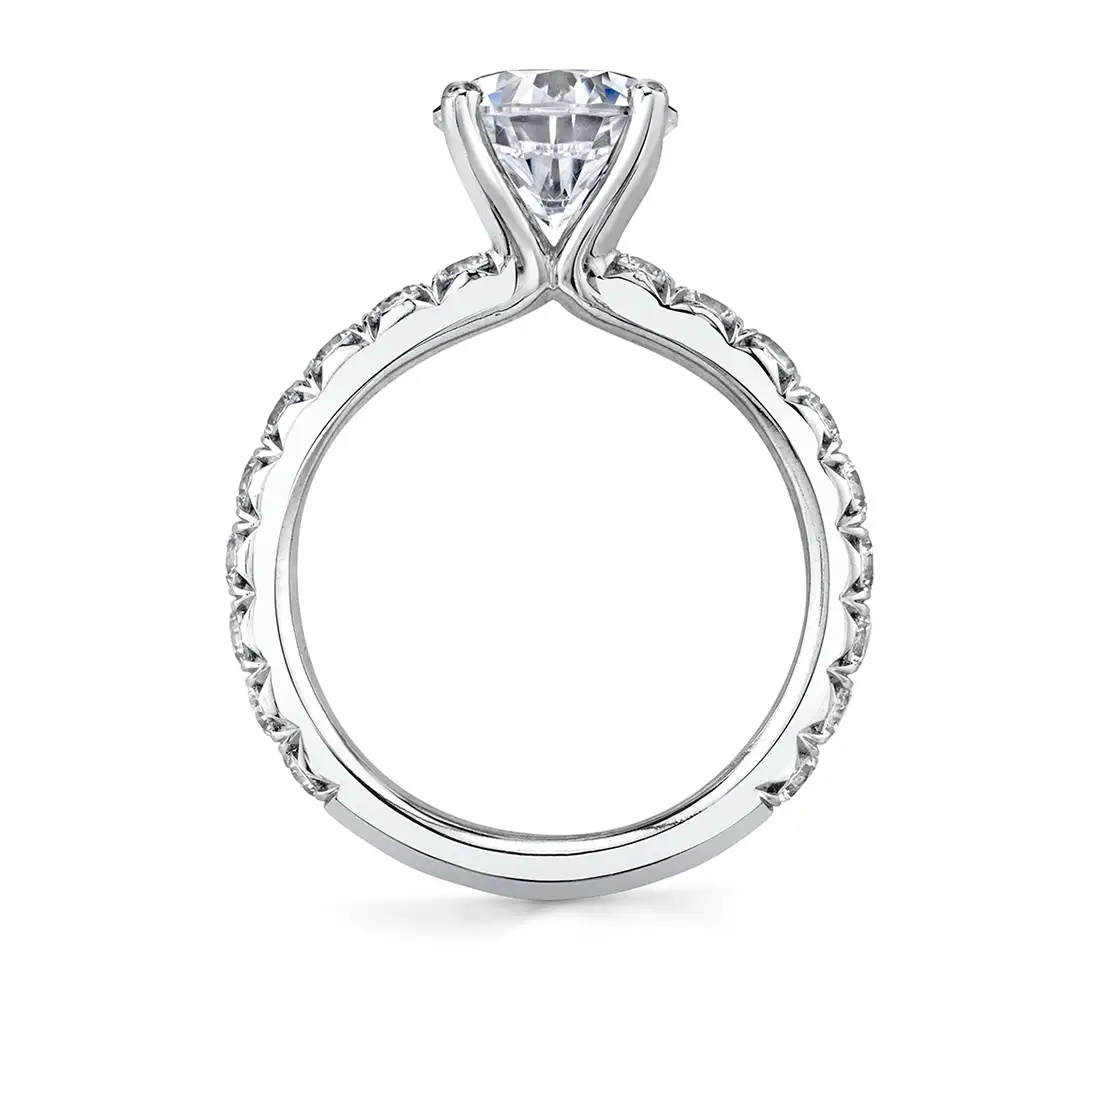 side view of a Wide Band Engagement Ring - Marlise